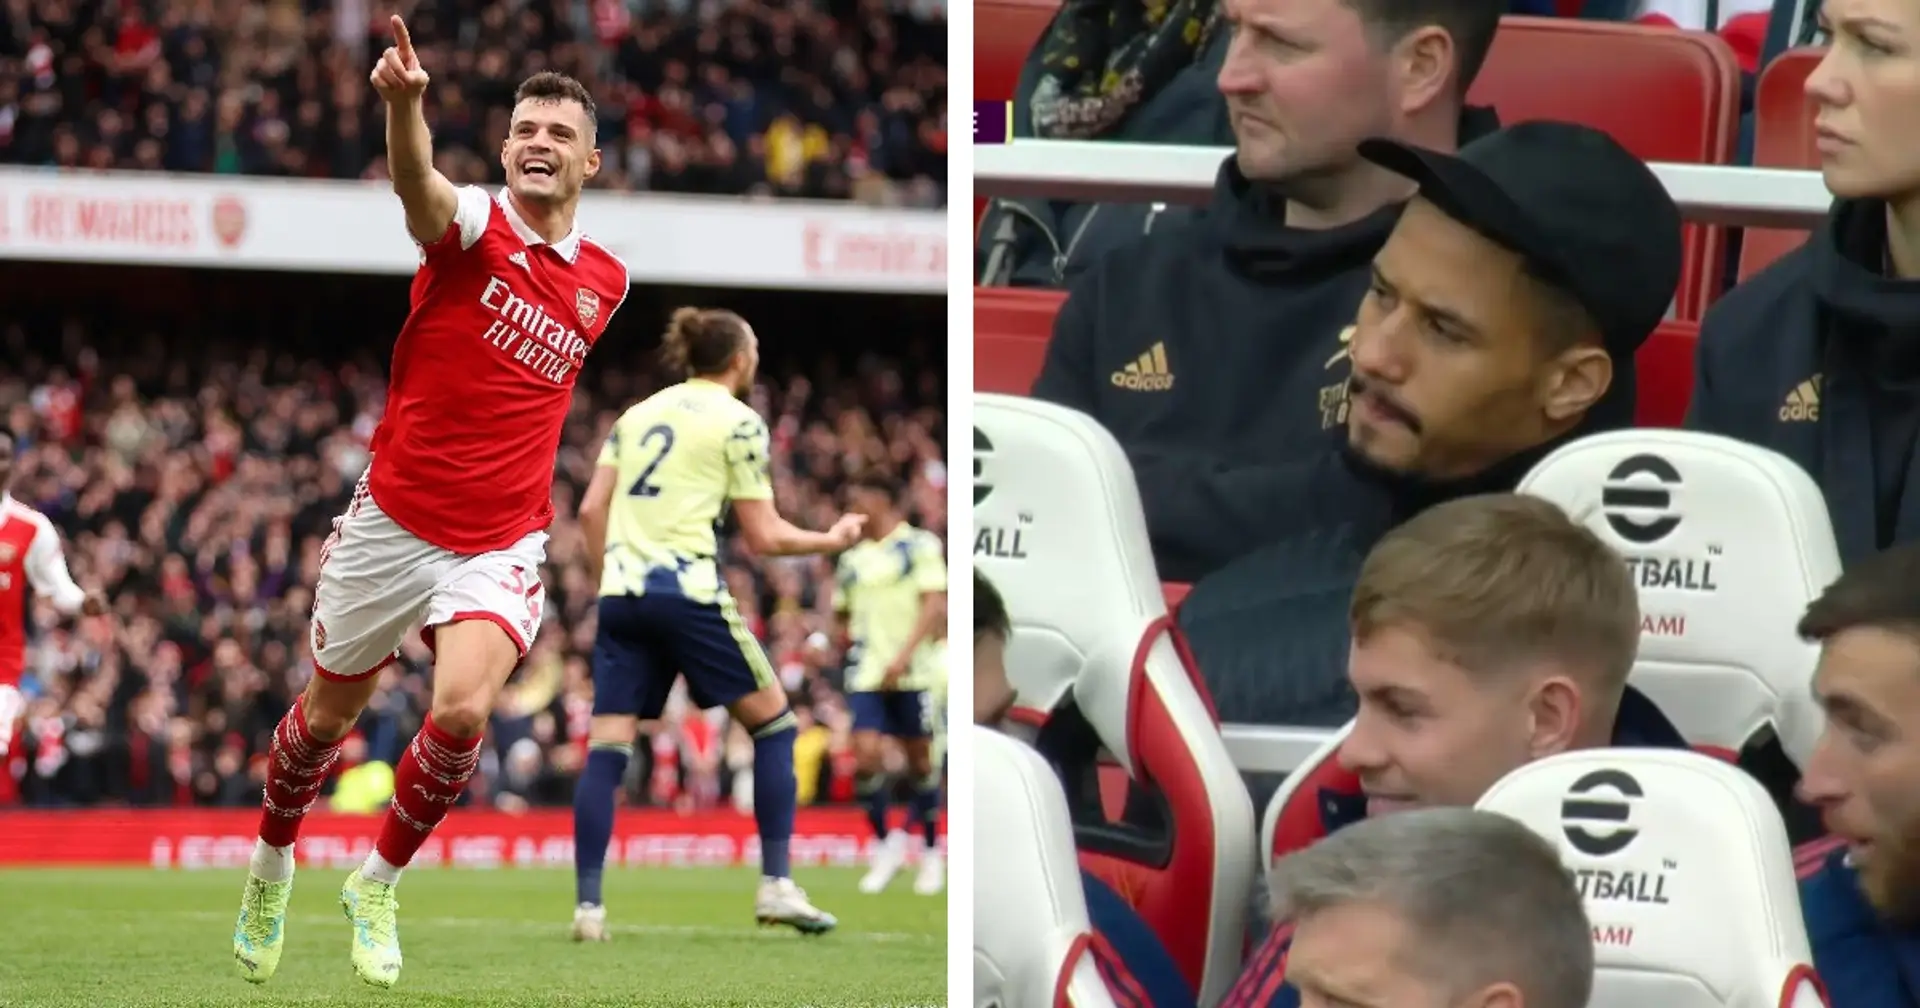 SPOTTED: Saliba's charming gesture to Xhaka after performance v Leeds. Odegaard was pleased 